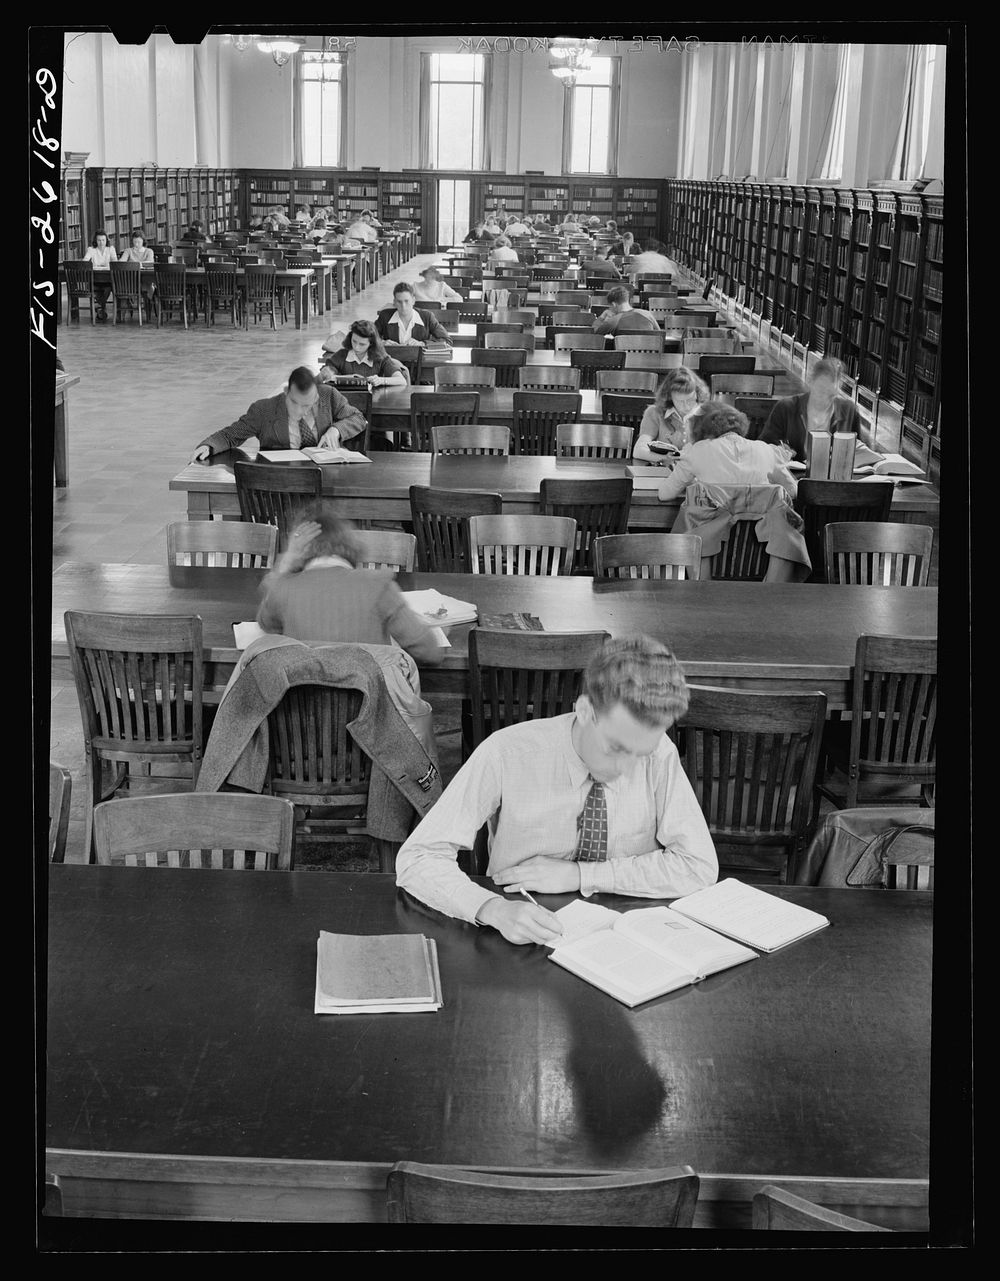 [Untitled photo, possibly related to: In the library at Iowa State College. Ames, Iowa]. Sourced from the Library of…